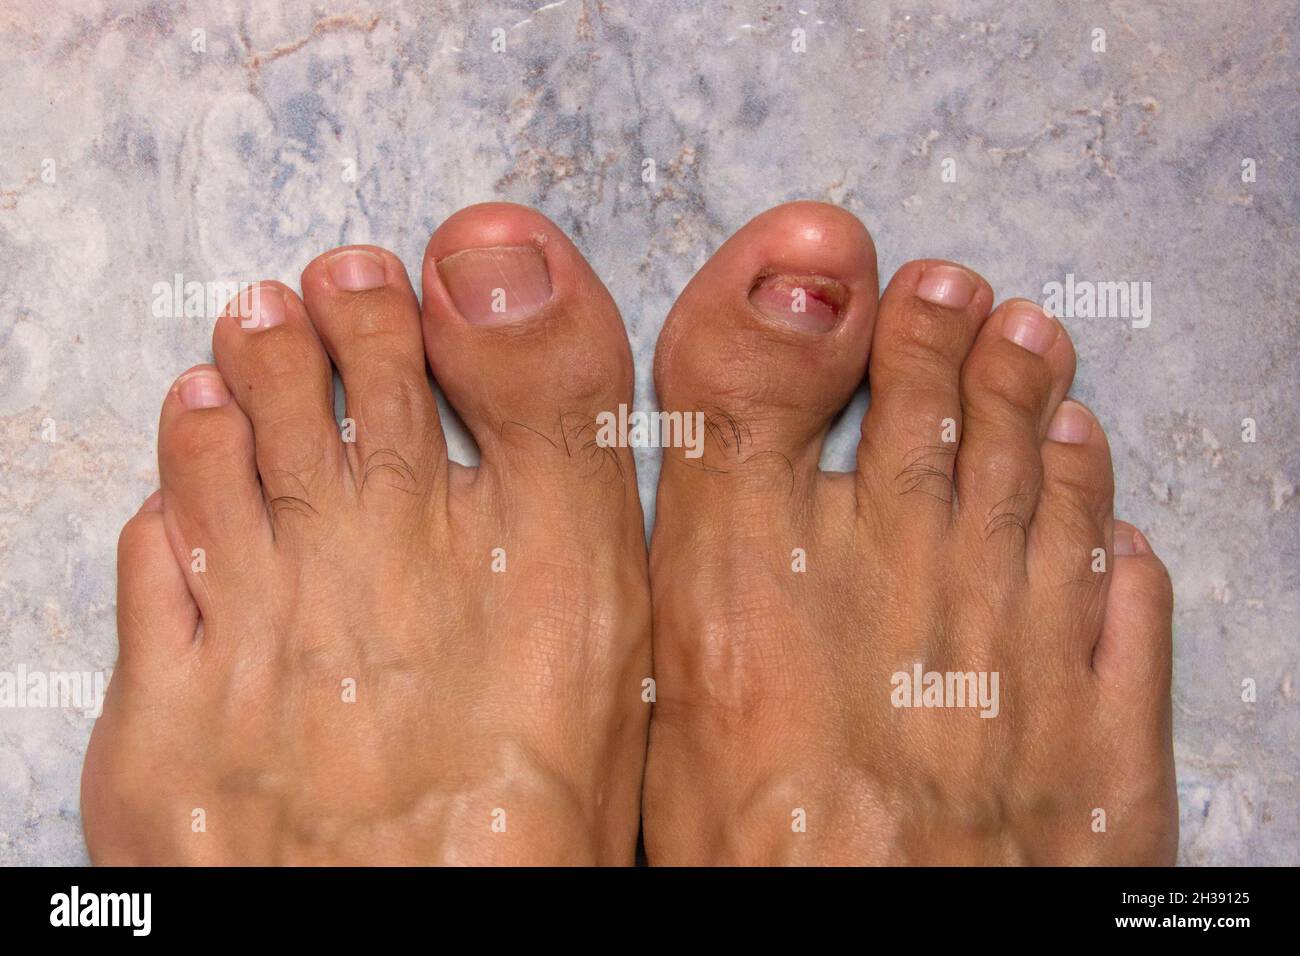 Fungus on big toe nail. Feet of man together on blue floor. Medical, health care, podiatrist concepts Stock Photo